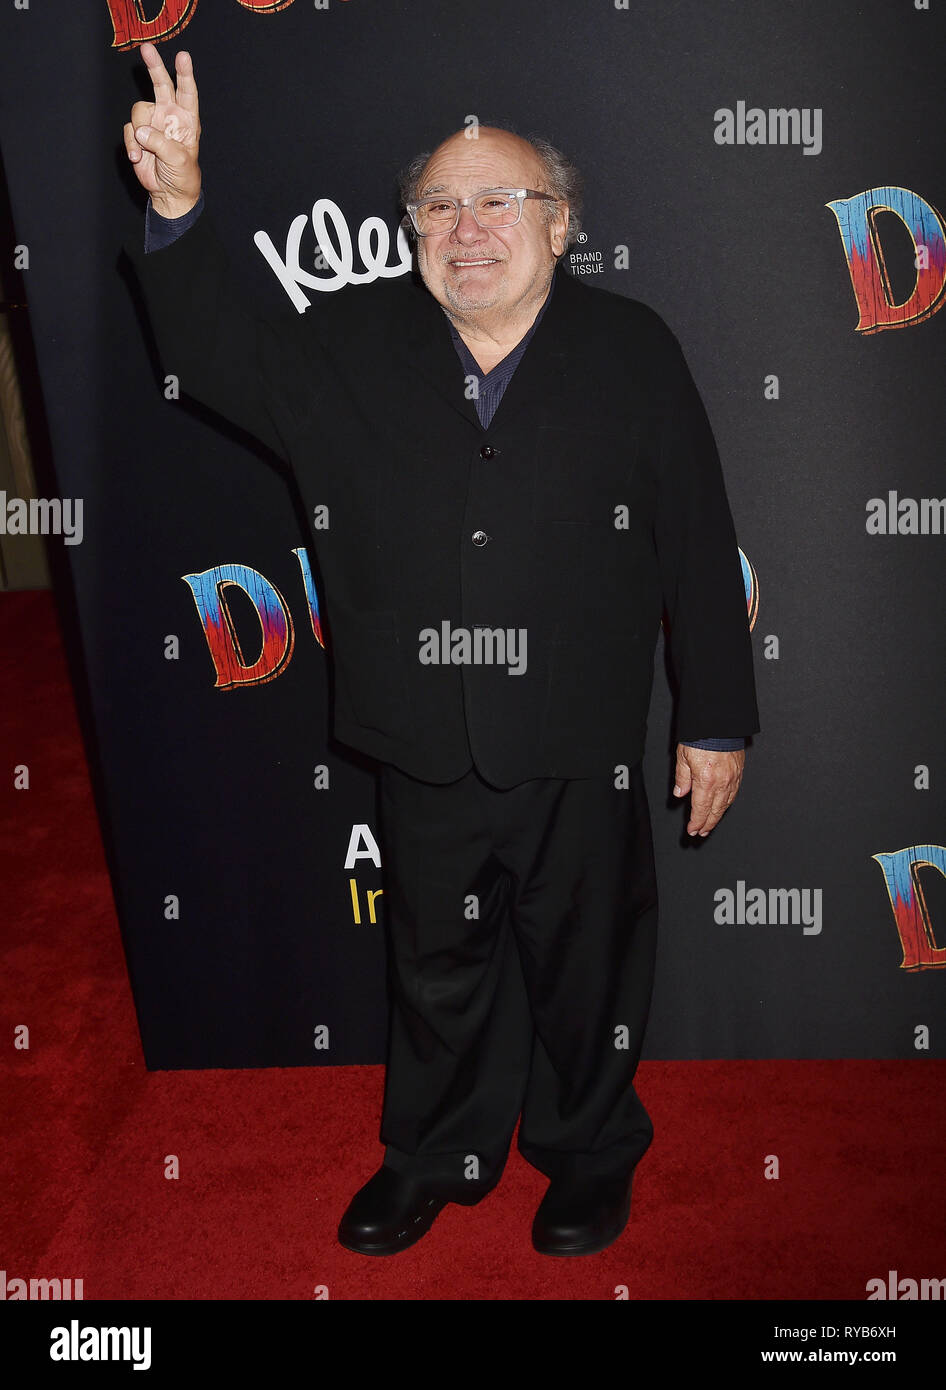 HOLLYWOOD, CA - MARCH 11: Danny DeVito attends the premiere of Disney's 'Dumbo' at El Capitan Theatre on March 11, 2019 in Los Angeles, California. Stock Photo